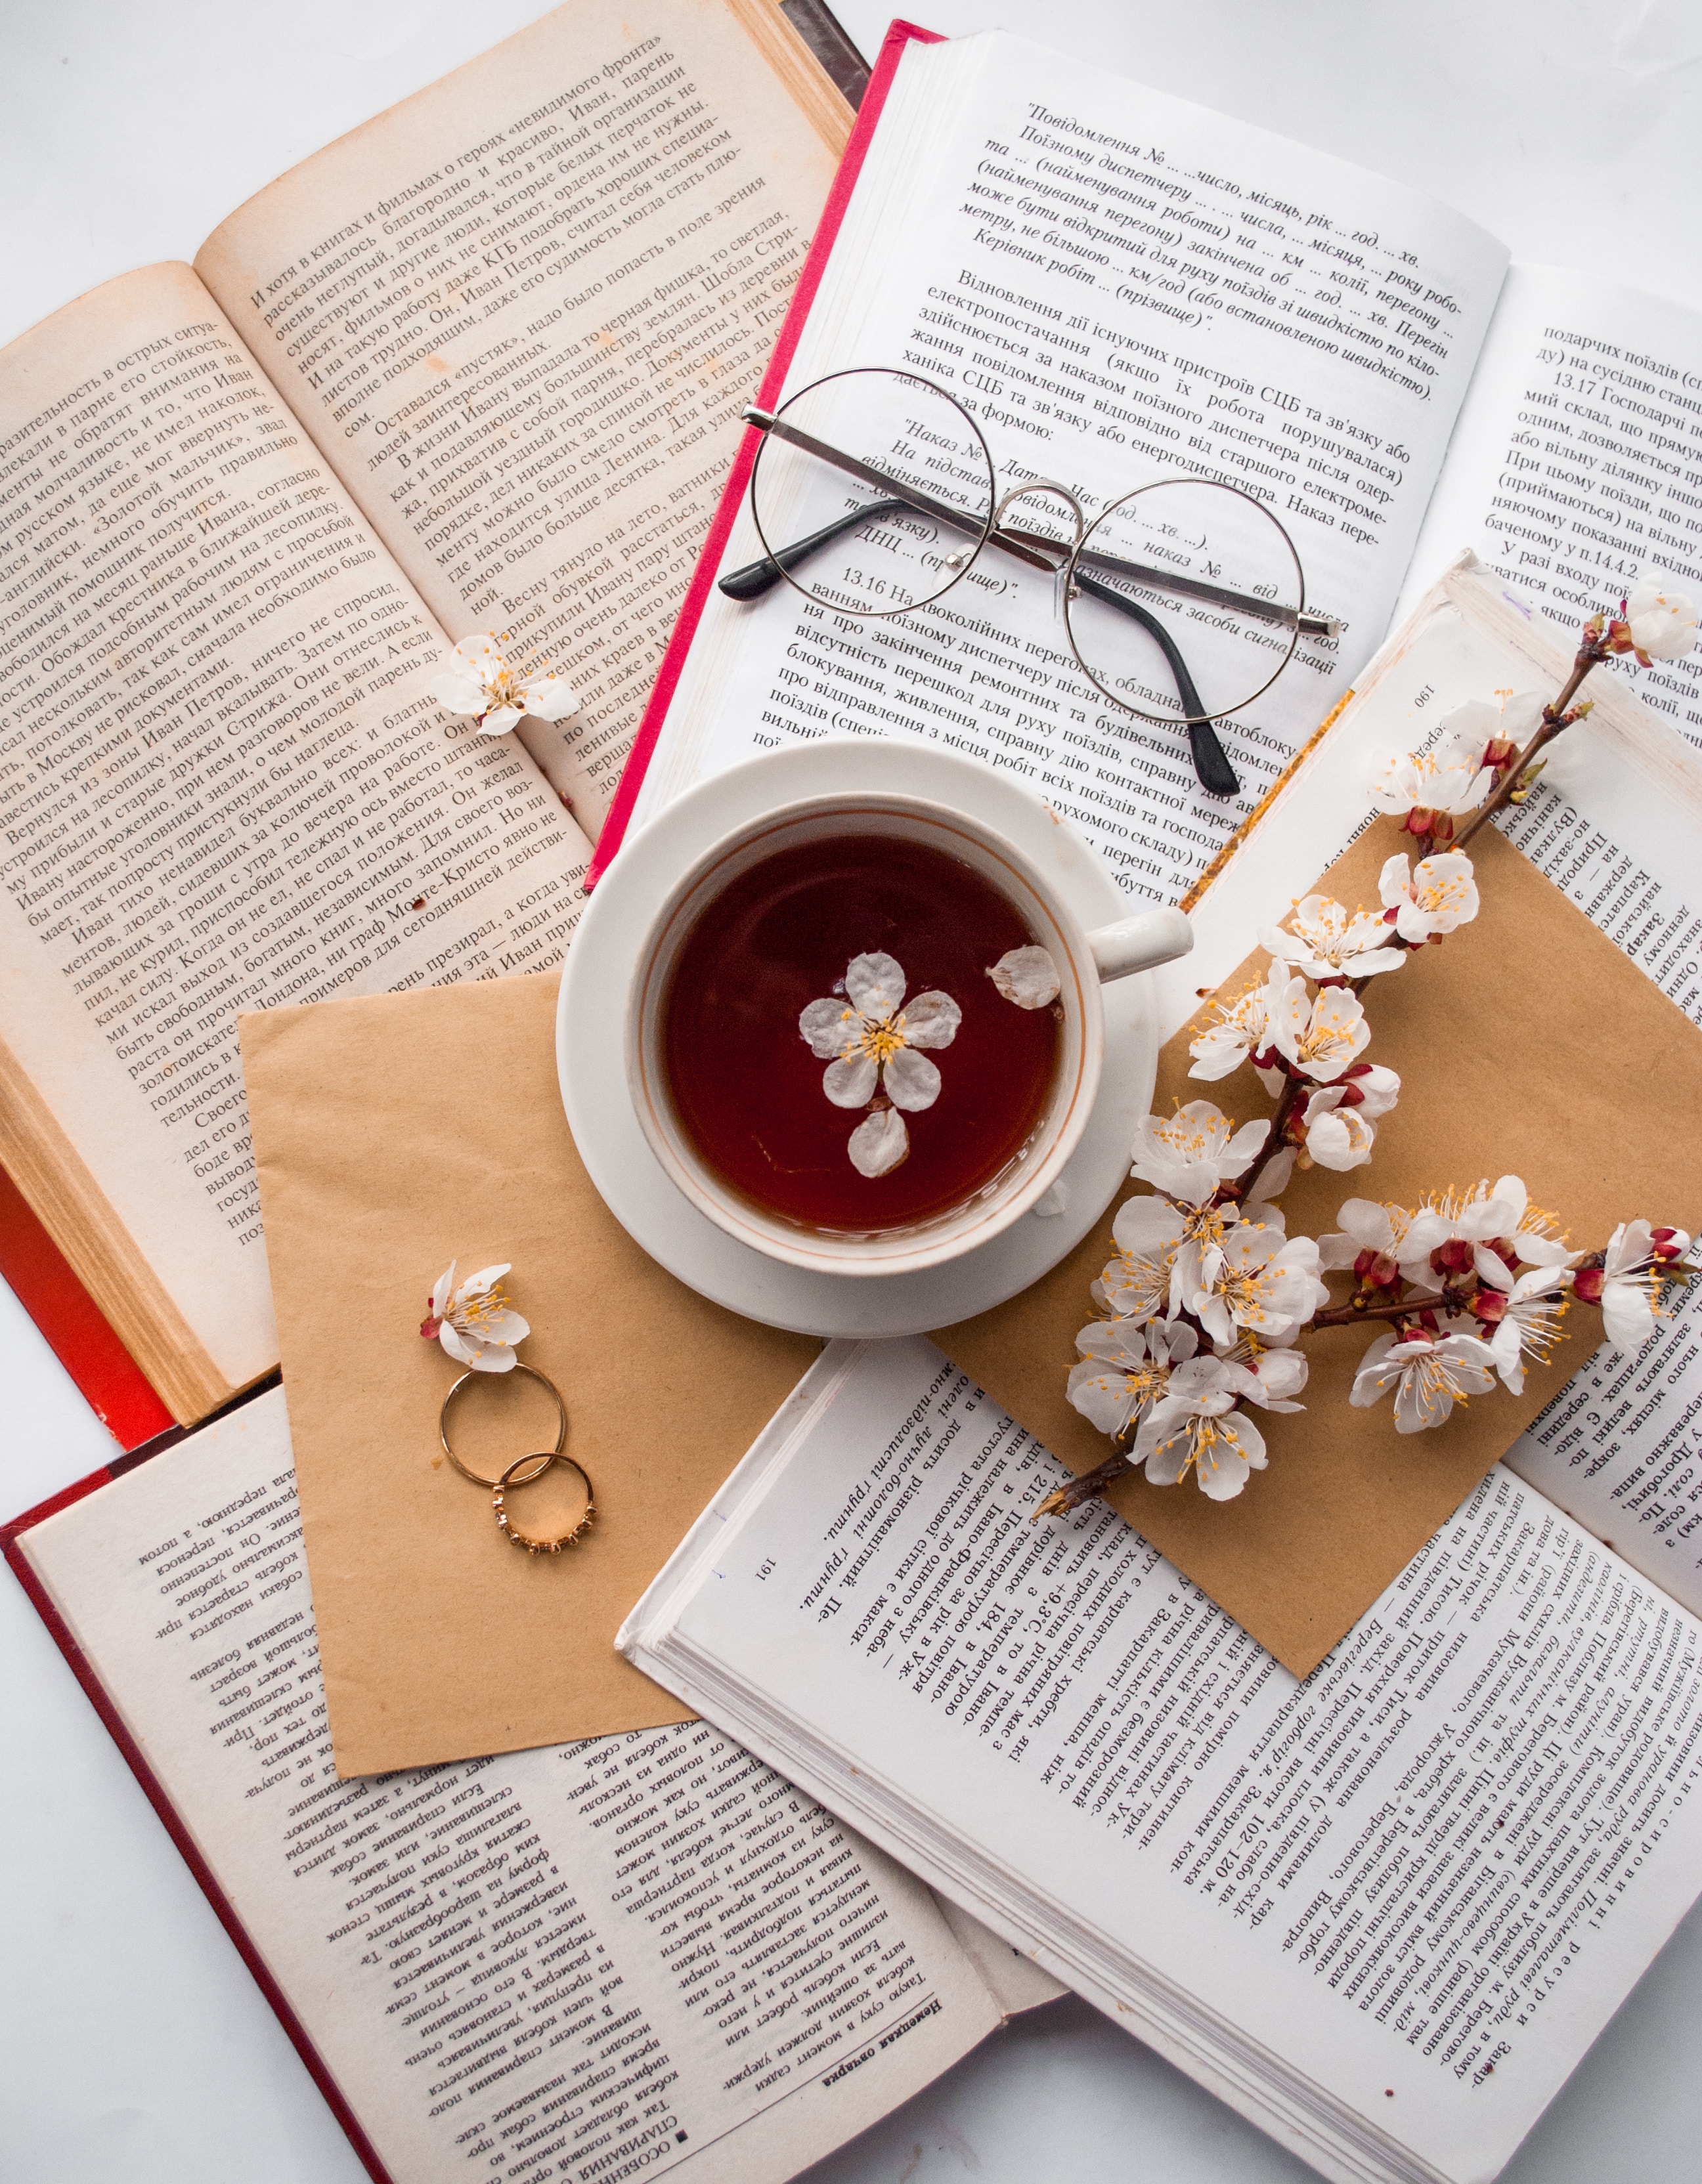 books, flowers, rings, miscellanea, miscellaneous, cup, glasses, spectacles cellphone